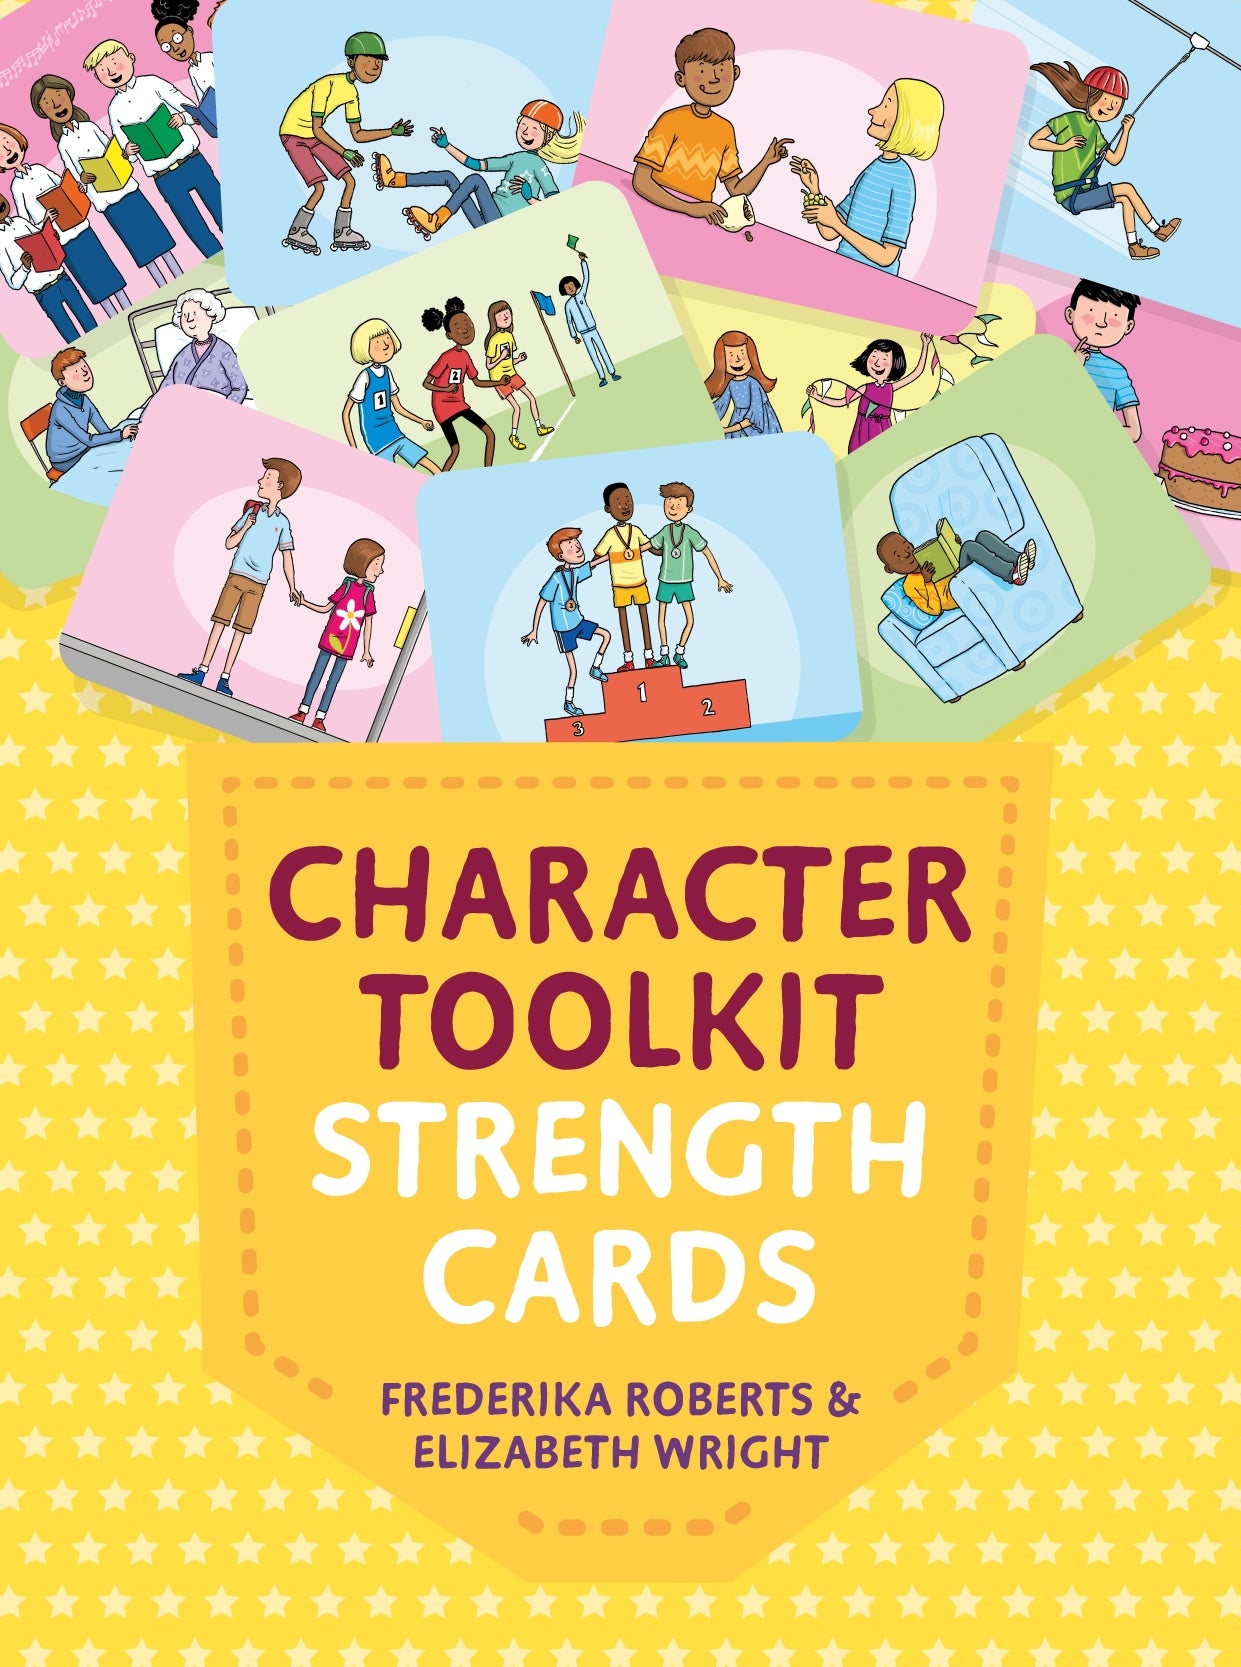 Character Toolkit Strength Cards by David O'Connell, Frederika Roberts, Elizabeth Wright